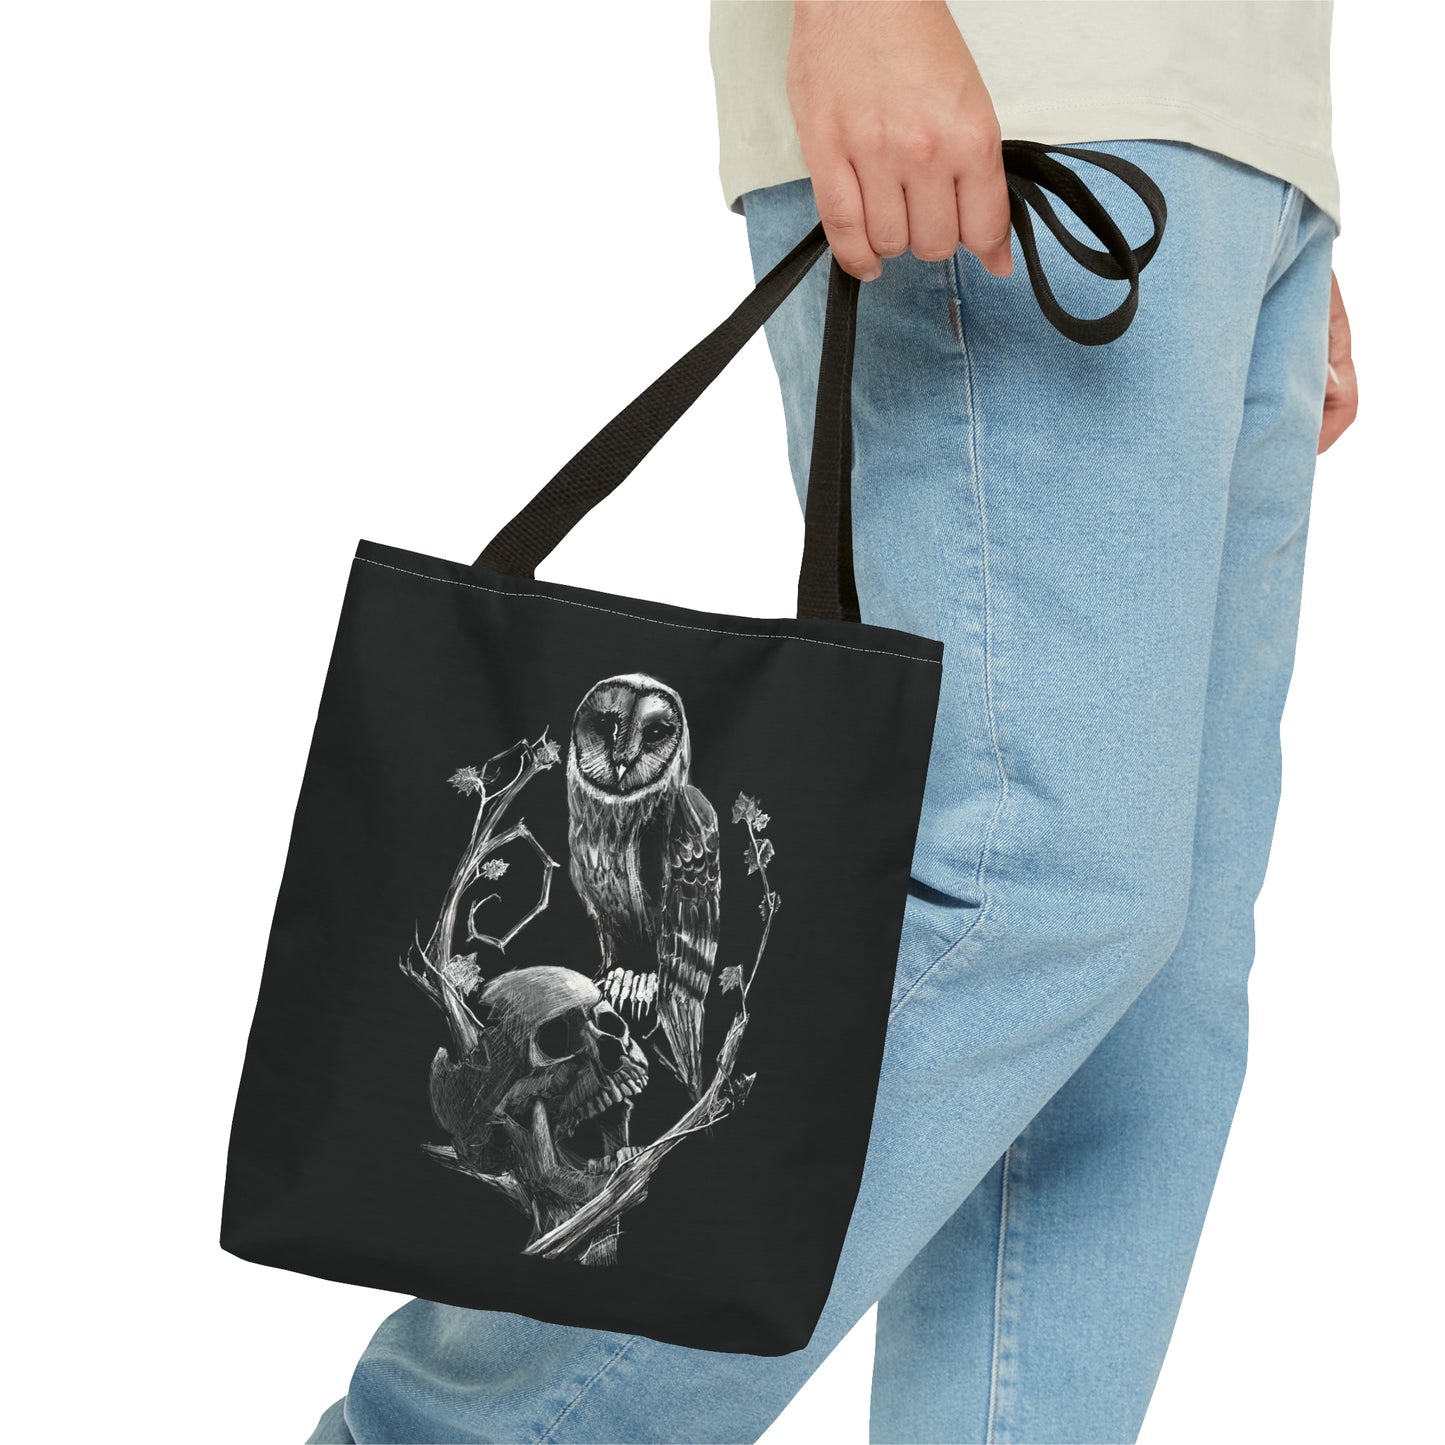 Skull and Owl Tote Bag